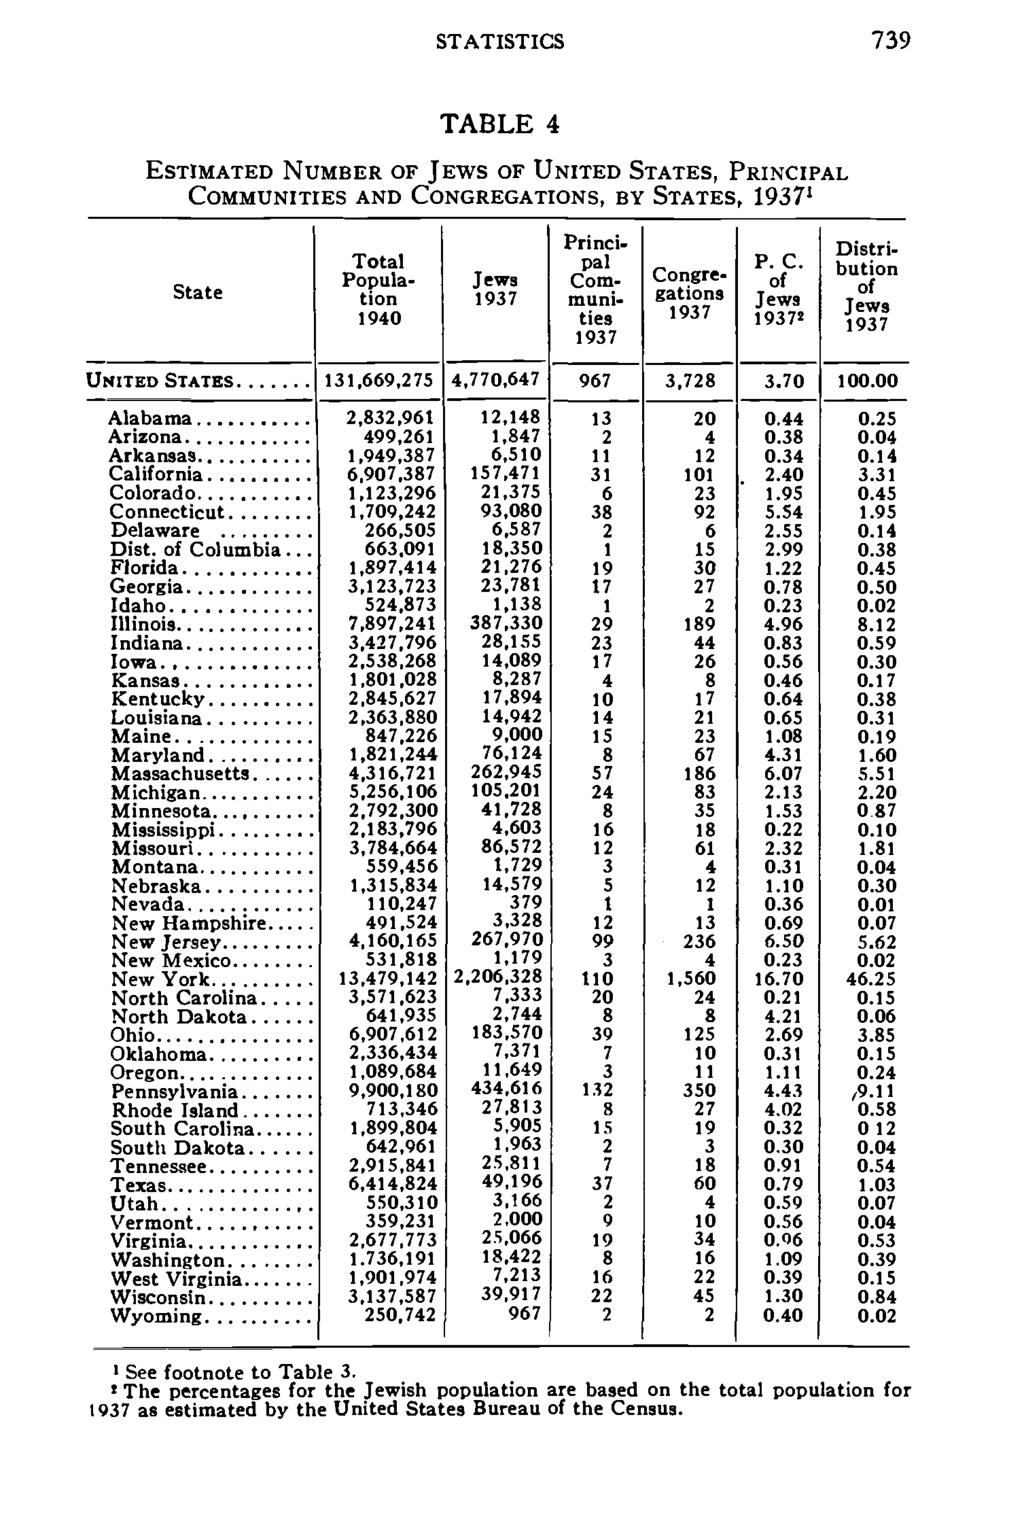 STATISTICS 739 TABLE 4 ESTIMATED NUMBER OF JEWS OF UNITED STATES, PRINCIPAL COMMUNITIES AND CONGREGATIONS, BY STATES, 1937 1 State Total Population 1940 Jews 1937 Principal Communities 1937